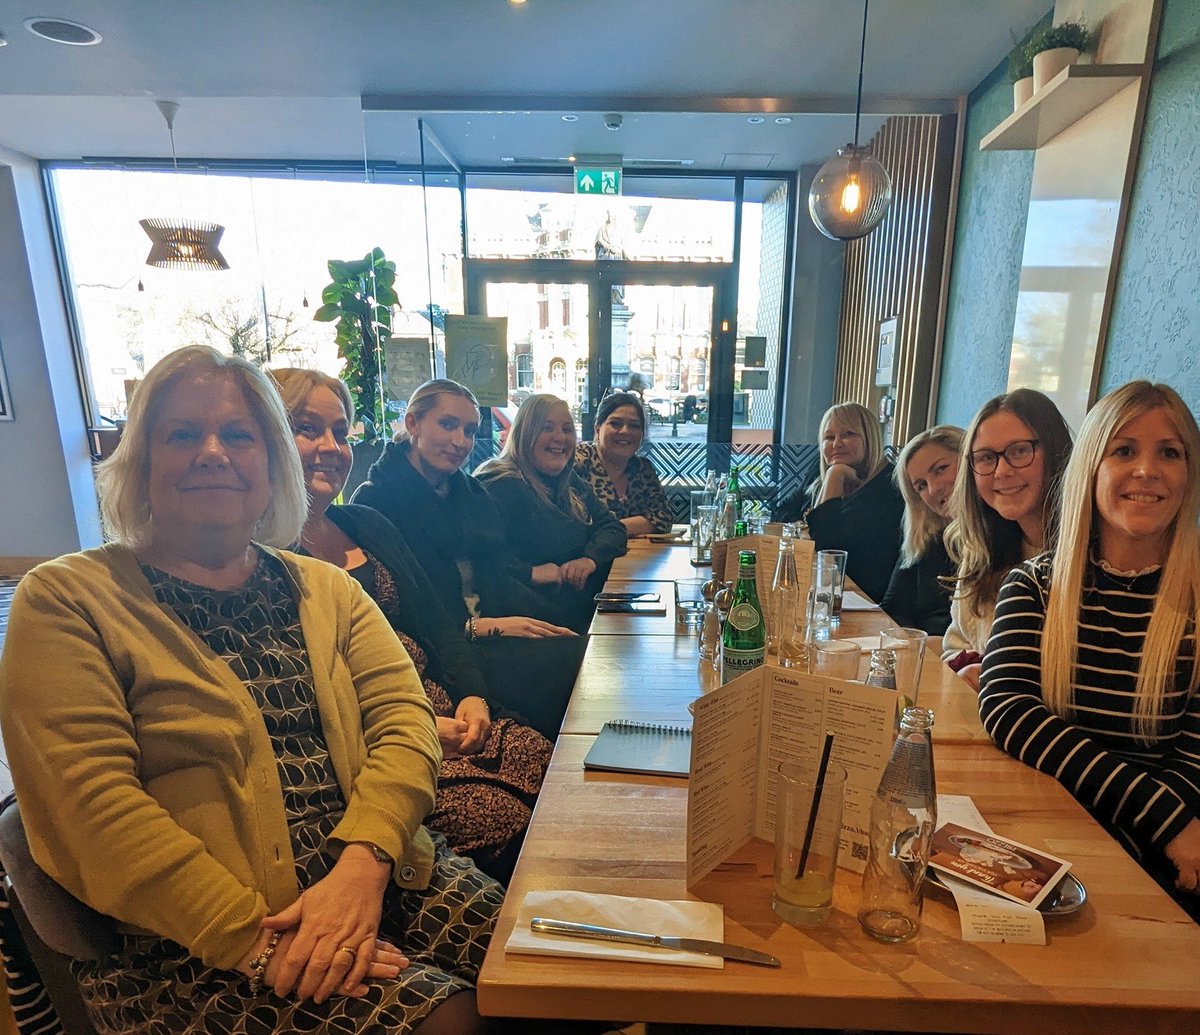 A fantastic working lunch today at @love_prezzo 
courtesy of @getflatfair for 16 No Deposit Plans between August and December last year🎉👏 

Starting the Year as we mean to go on with streamlined processes, setting new goals and putting our plans into action 🏢 📕 🤗